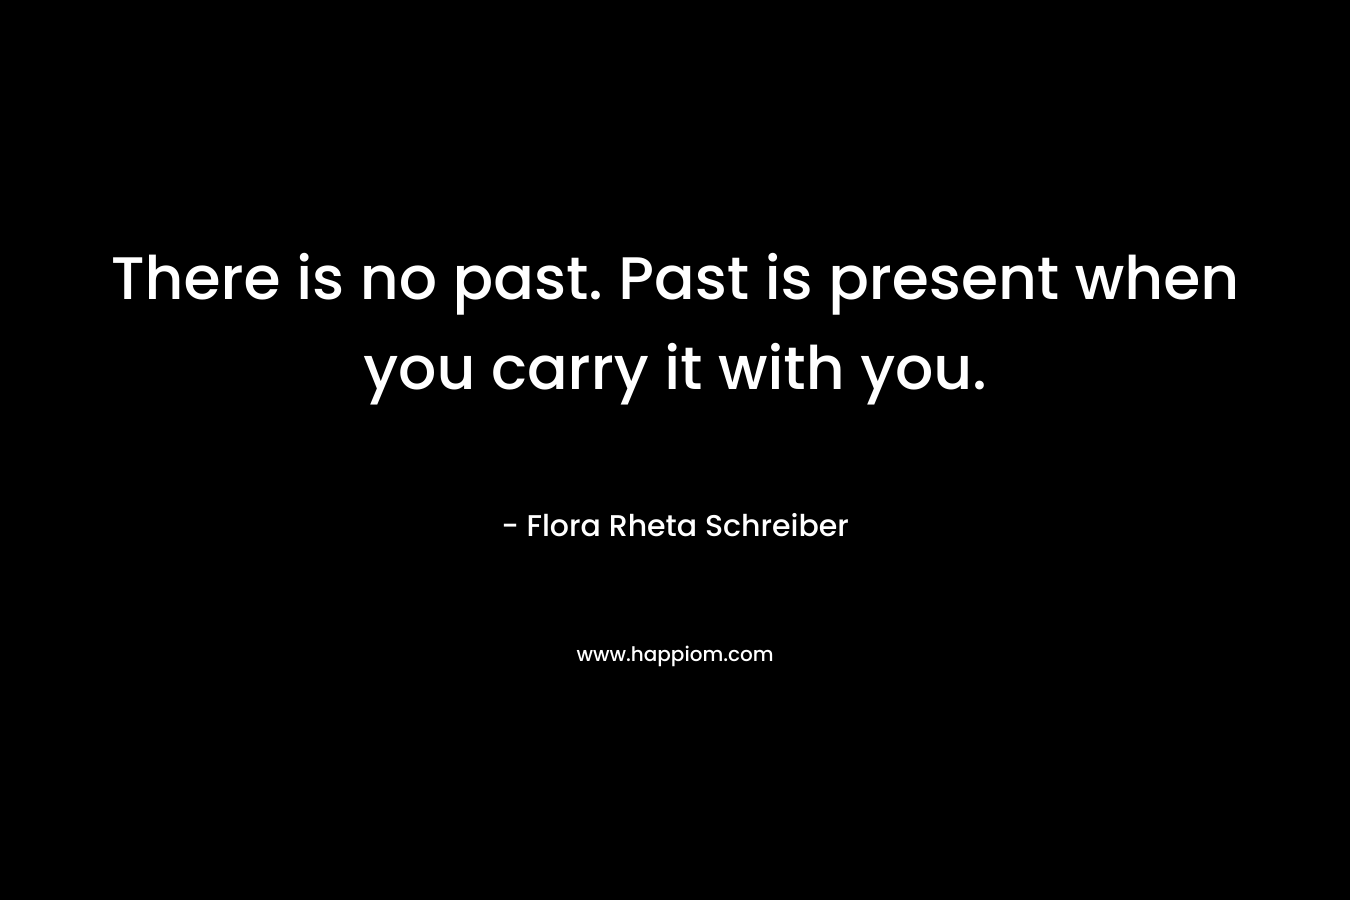 There is no past. Past is present when you carry it with you.